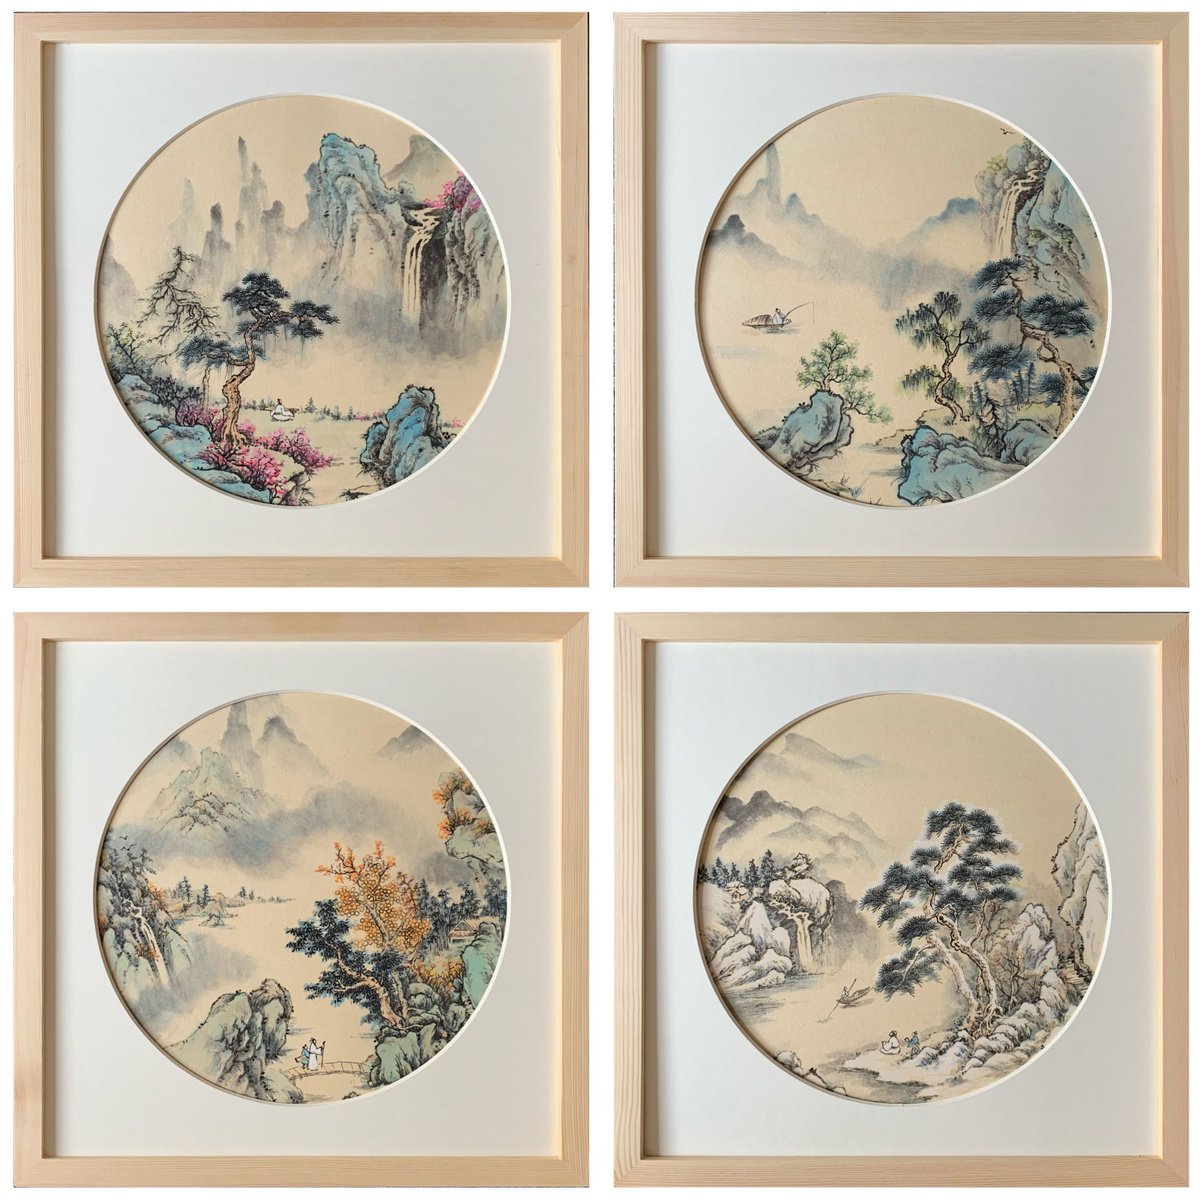 Landscape Painting of 4 Seasons, Original Brush Painting Set, Framed Square Wall Art by Fiona Sheng